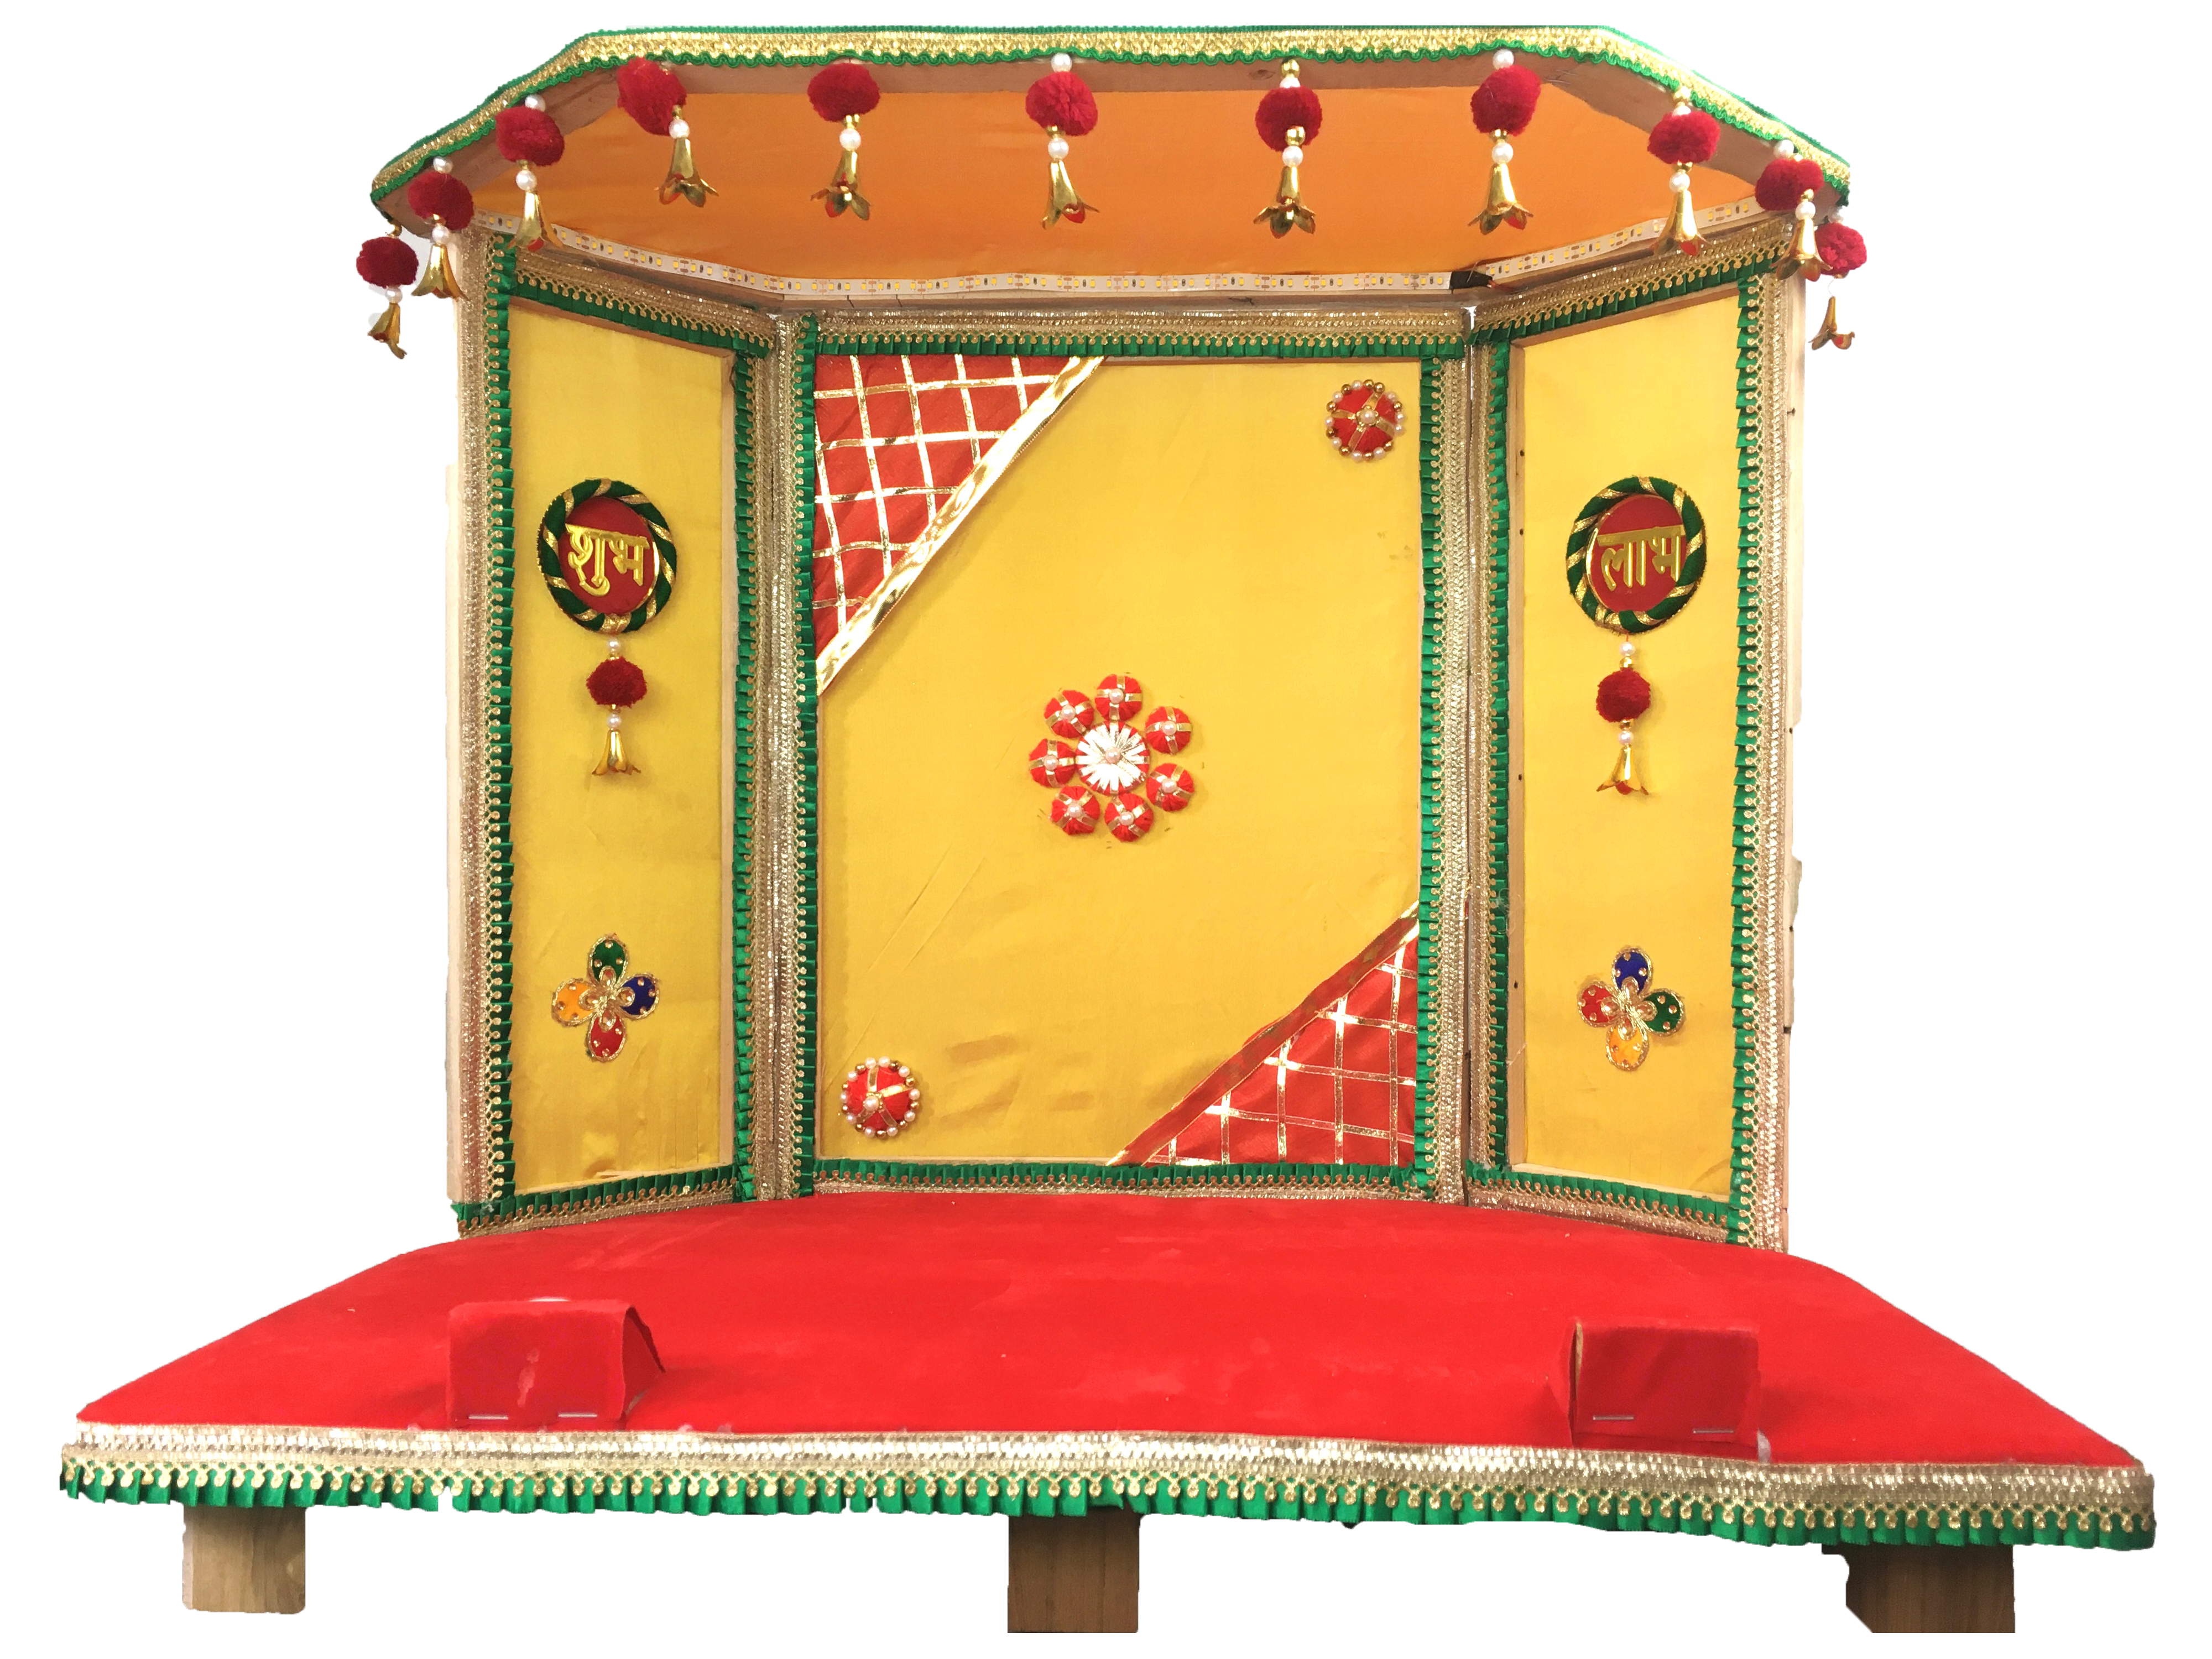 ACkrafts Eco friendly Made with Wood & Cloth, Handmade Temple